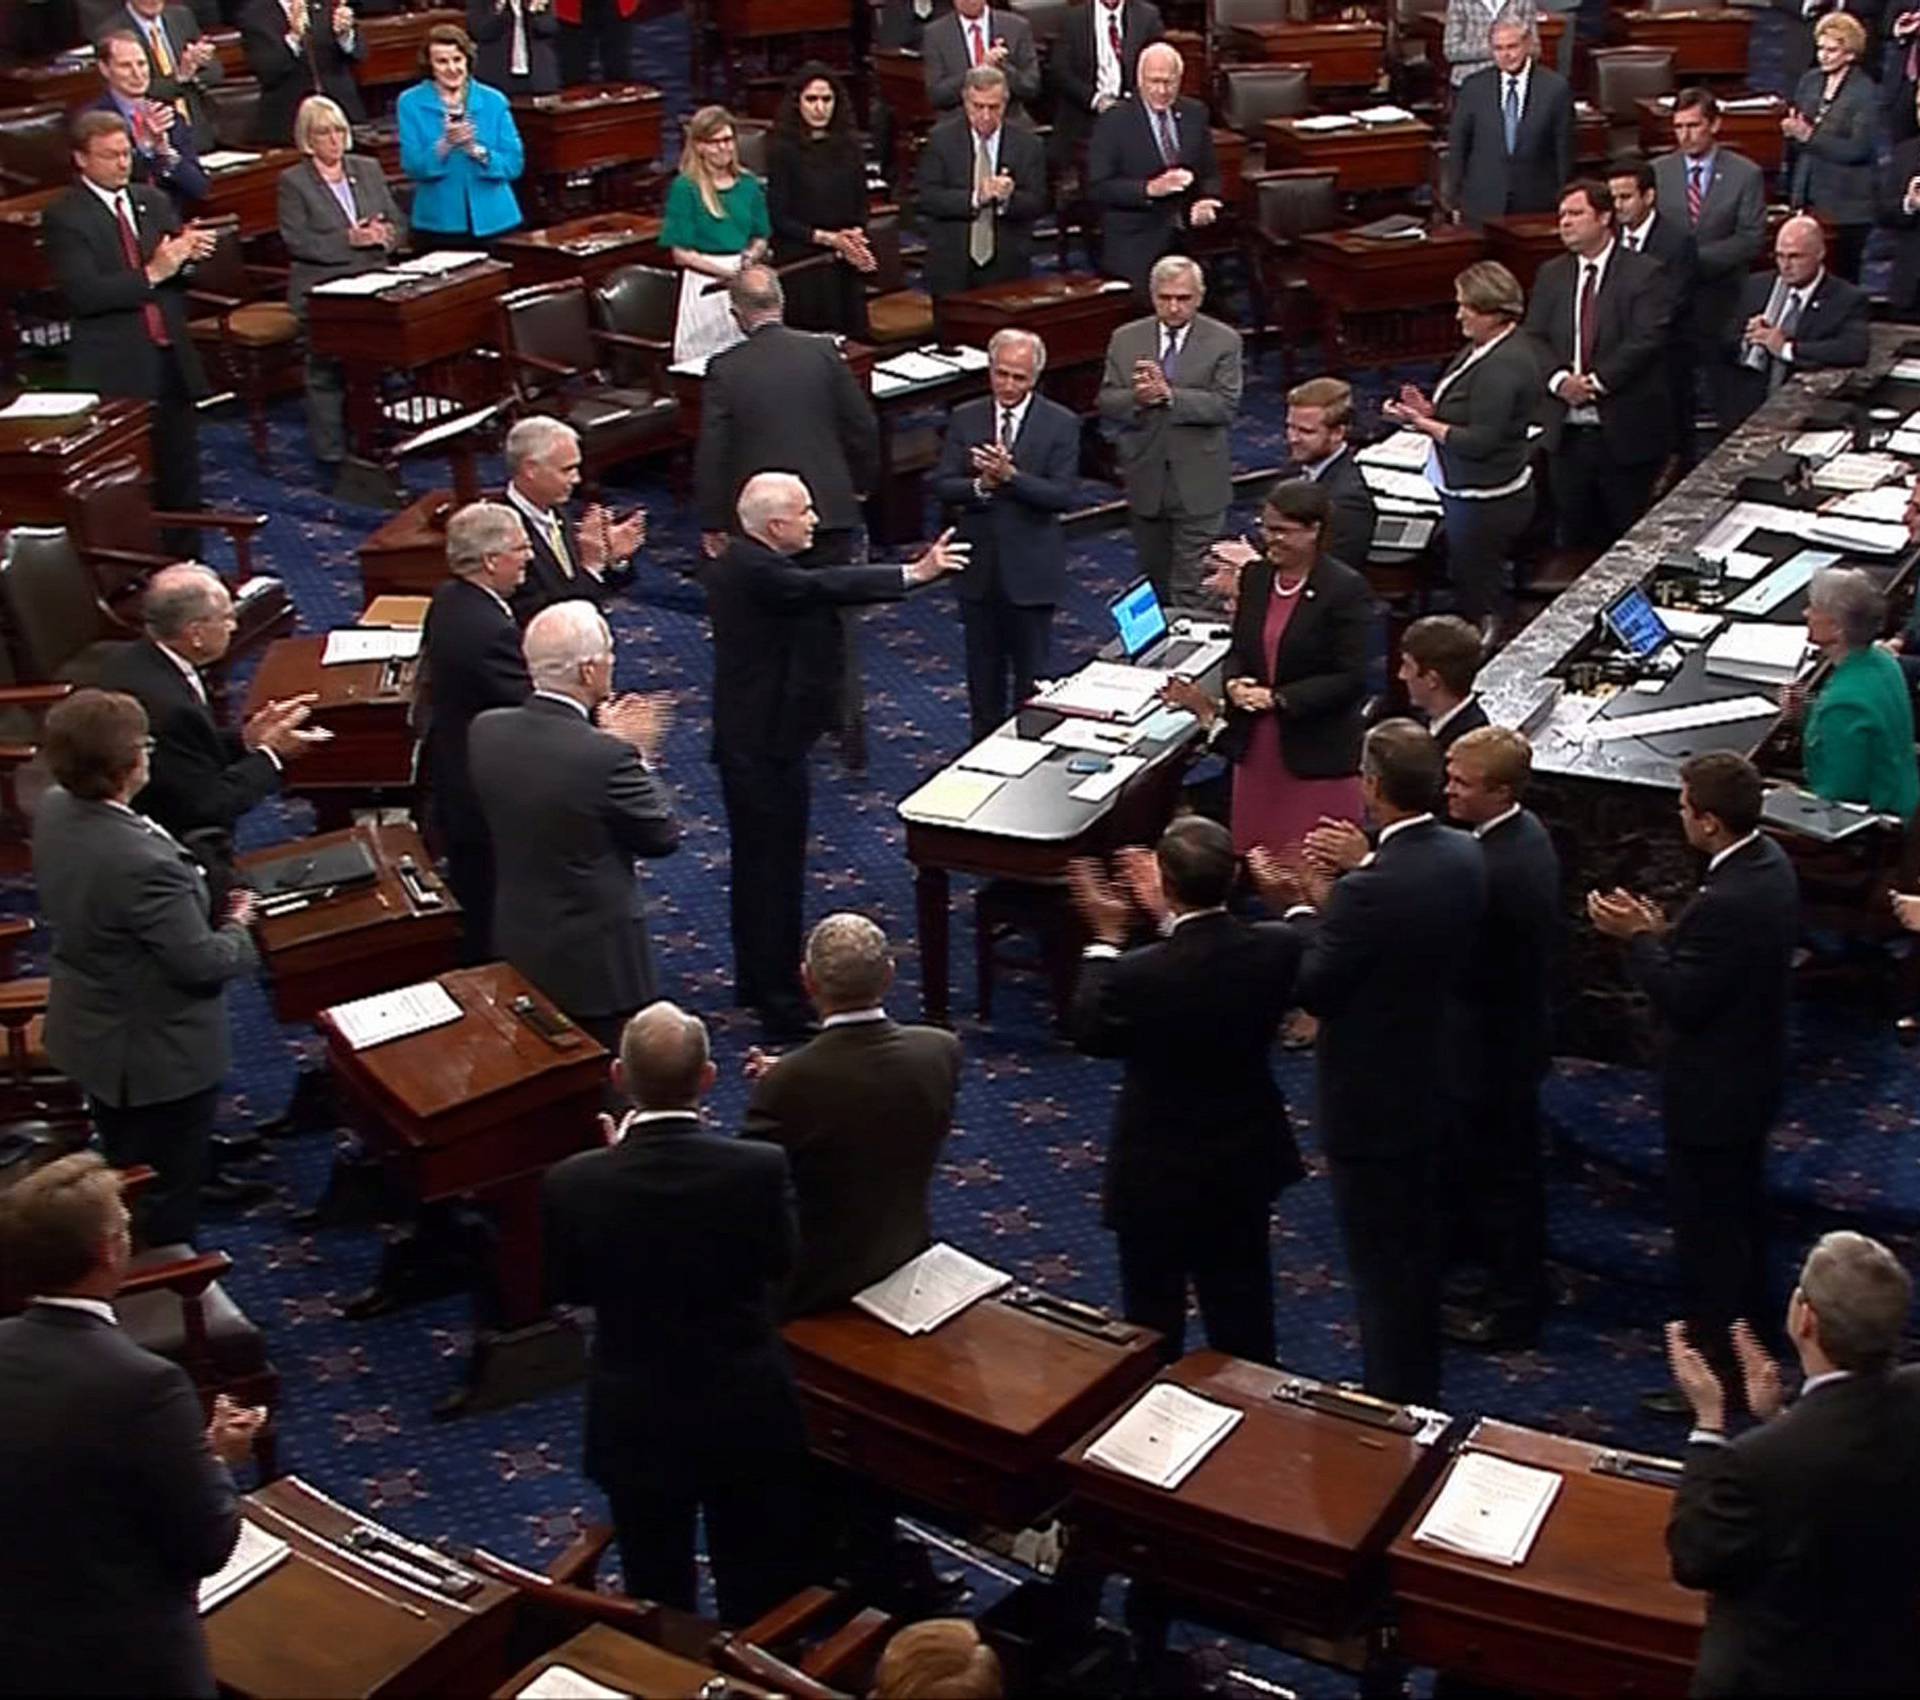 Still image from video shows U.S. Senator McCain arriving on the floor of the U.S. Senate for a vote on healthcare reform in Washington